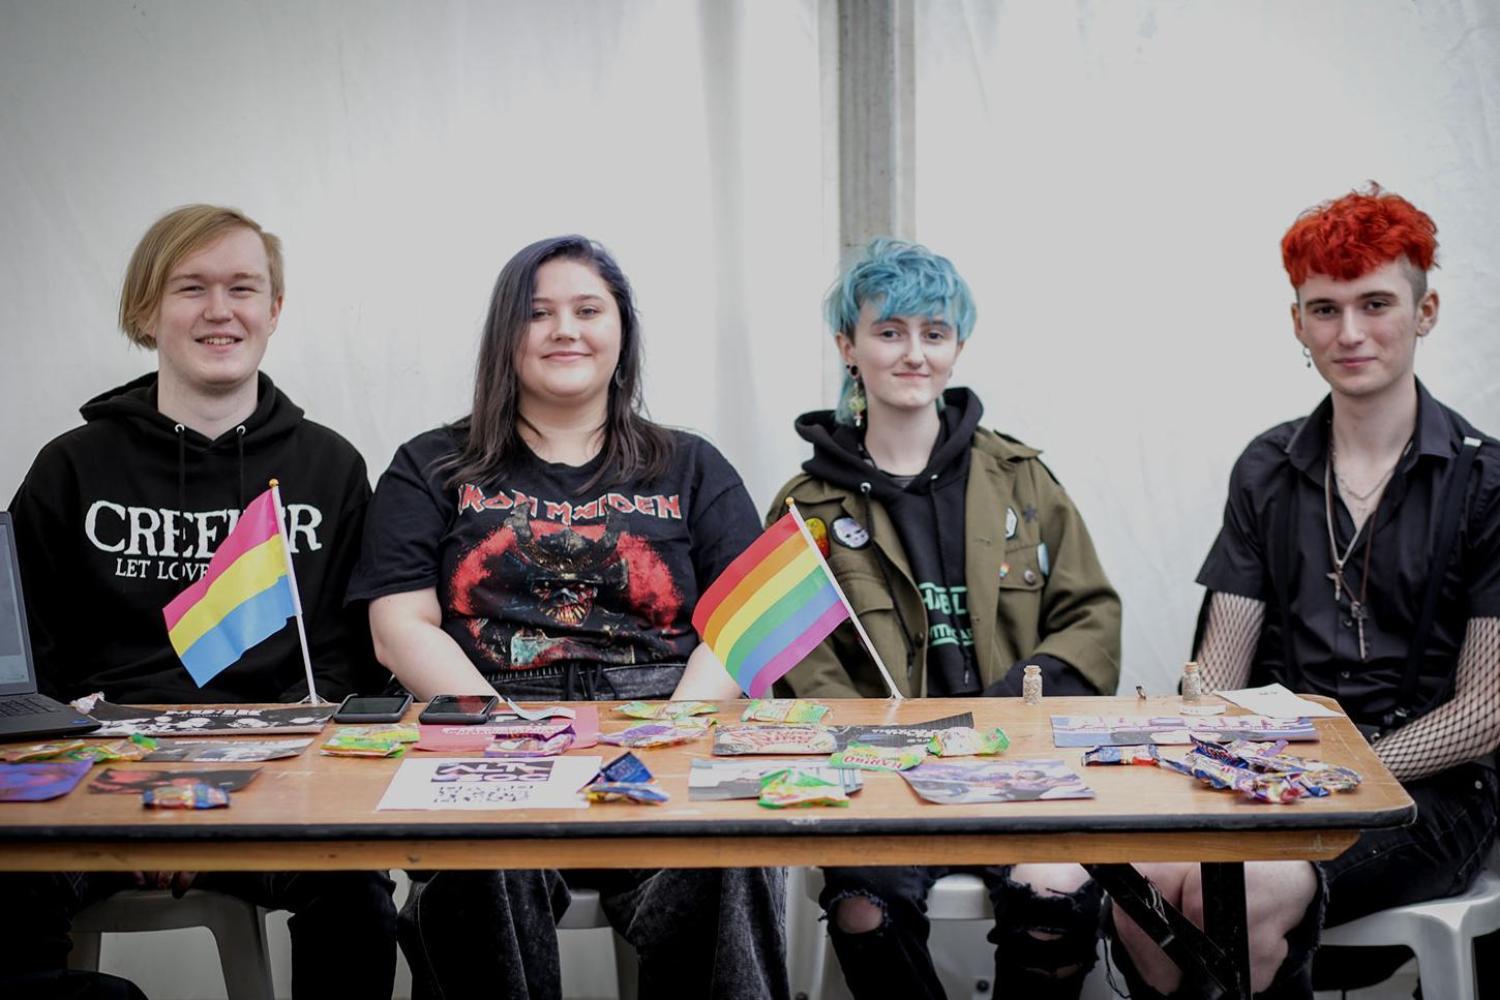 A group of students sit behind a trestle table covered in fliers and with a rainbow flag